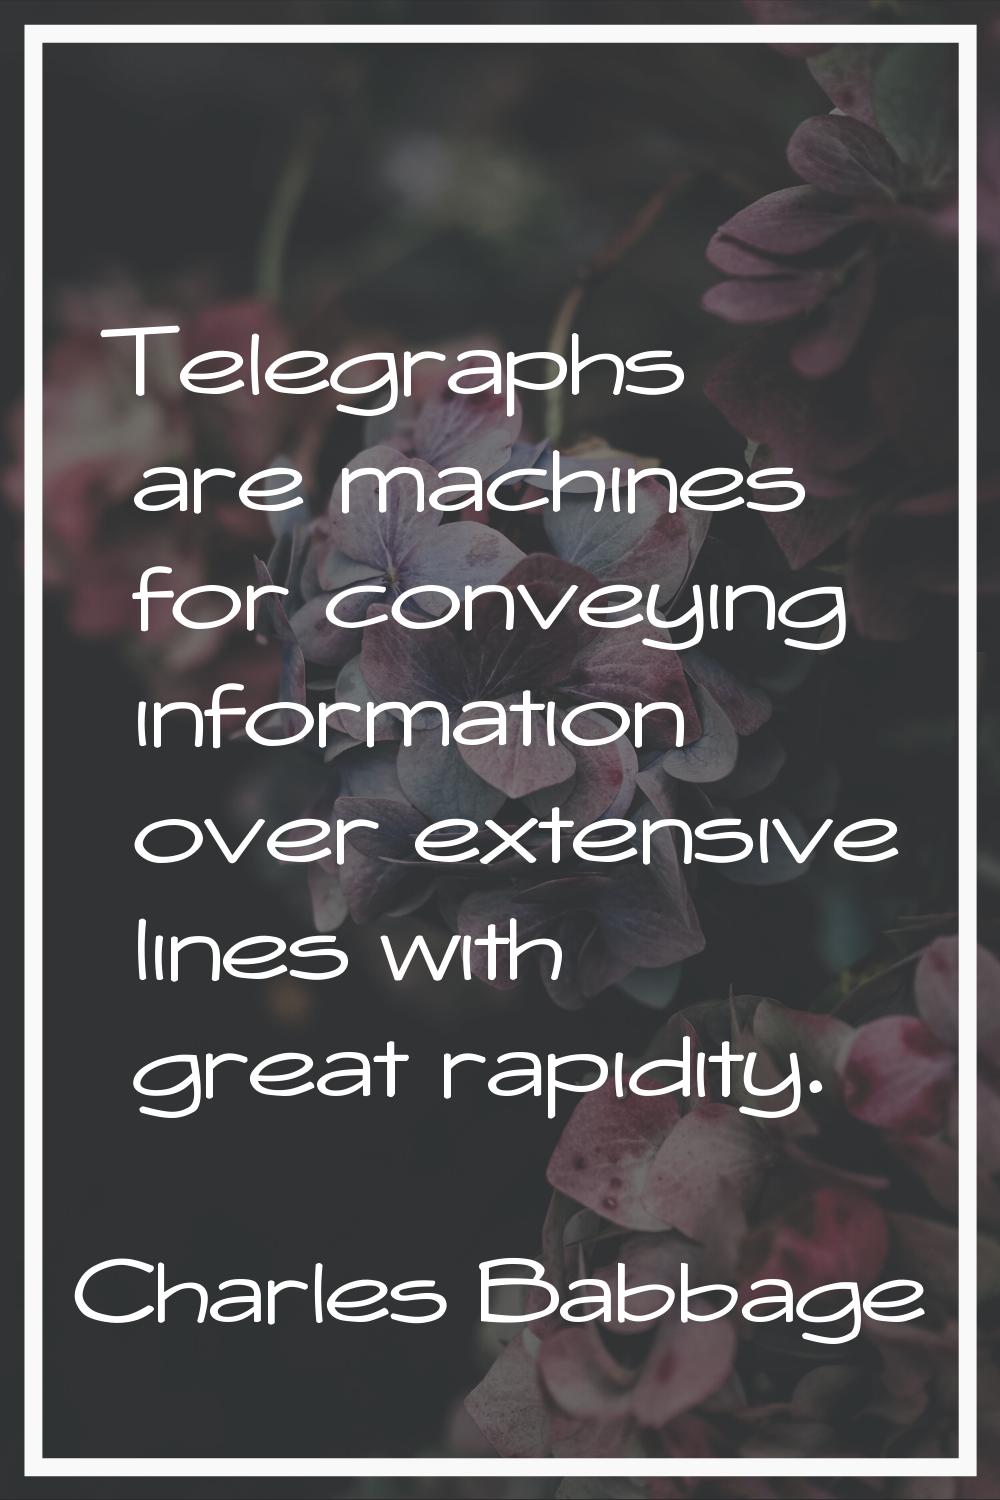 Telegraphs are machines for conveying information over extensive lines with great rapidity.